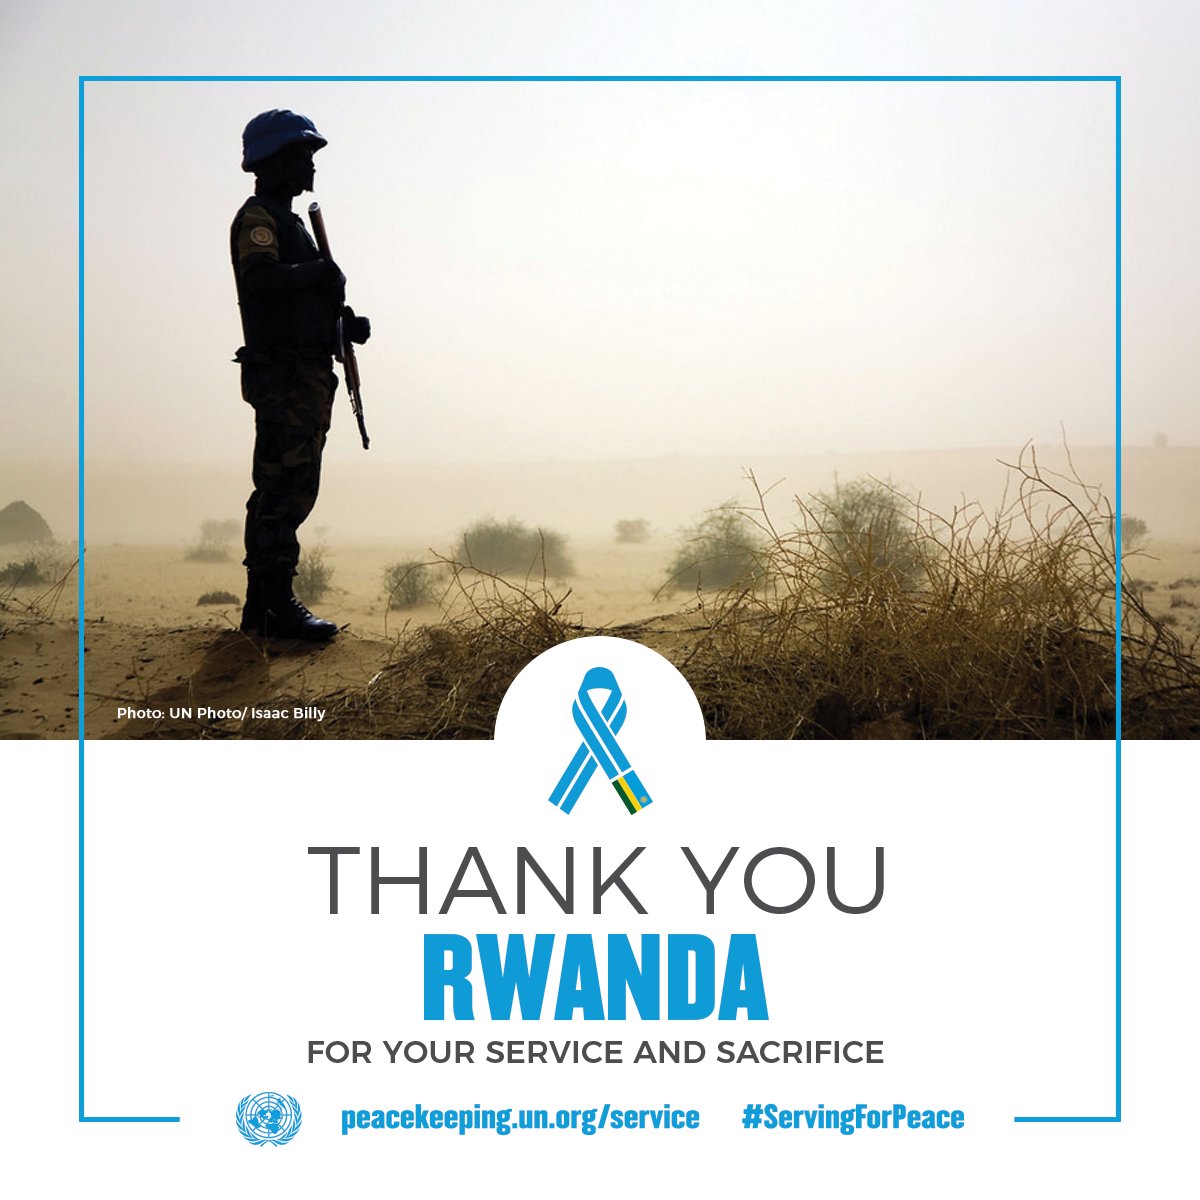 Rwanda is one of the odd countries in the world, if not the only one, whose constitution requires it to help impacted communities and participate in international peacekeeping.

#PeaceBegins   #PK75  #ServingForPeace